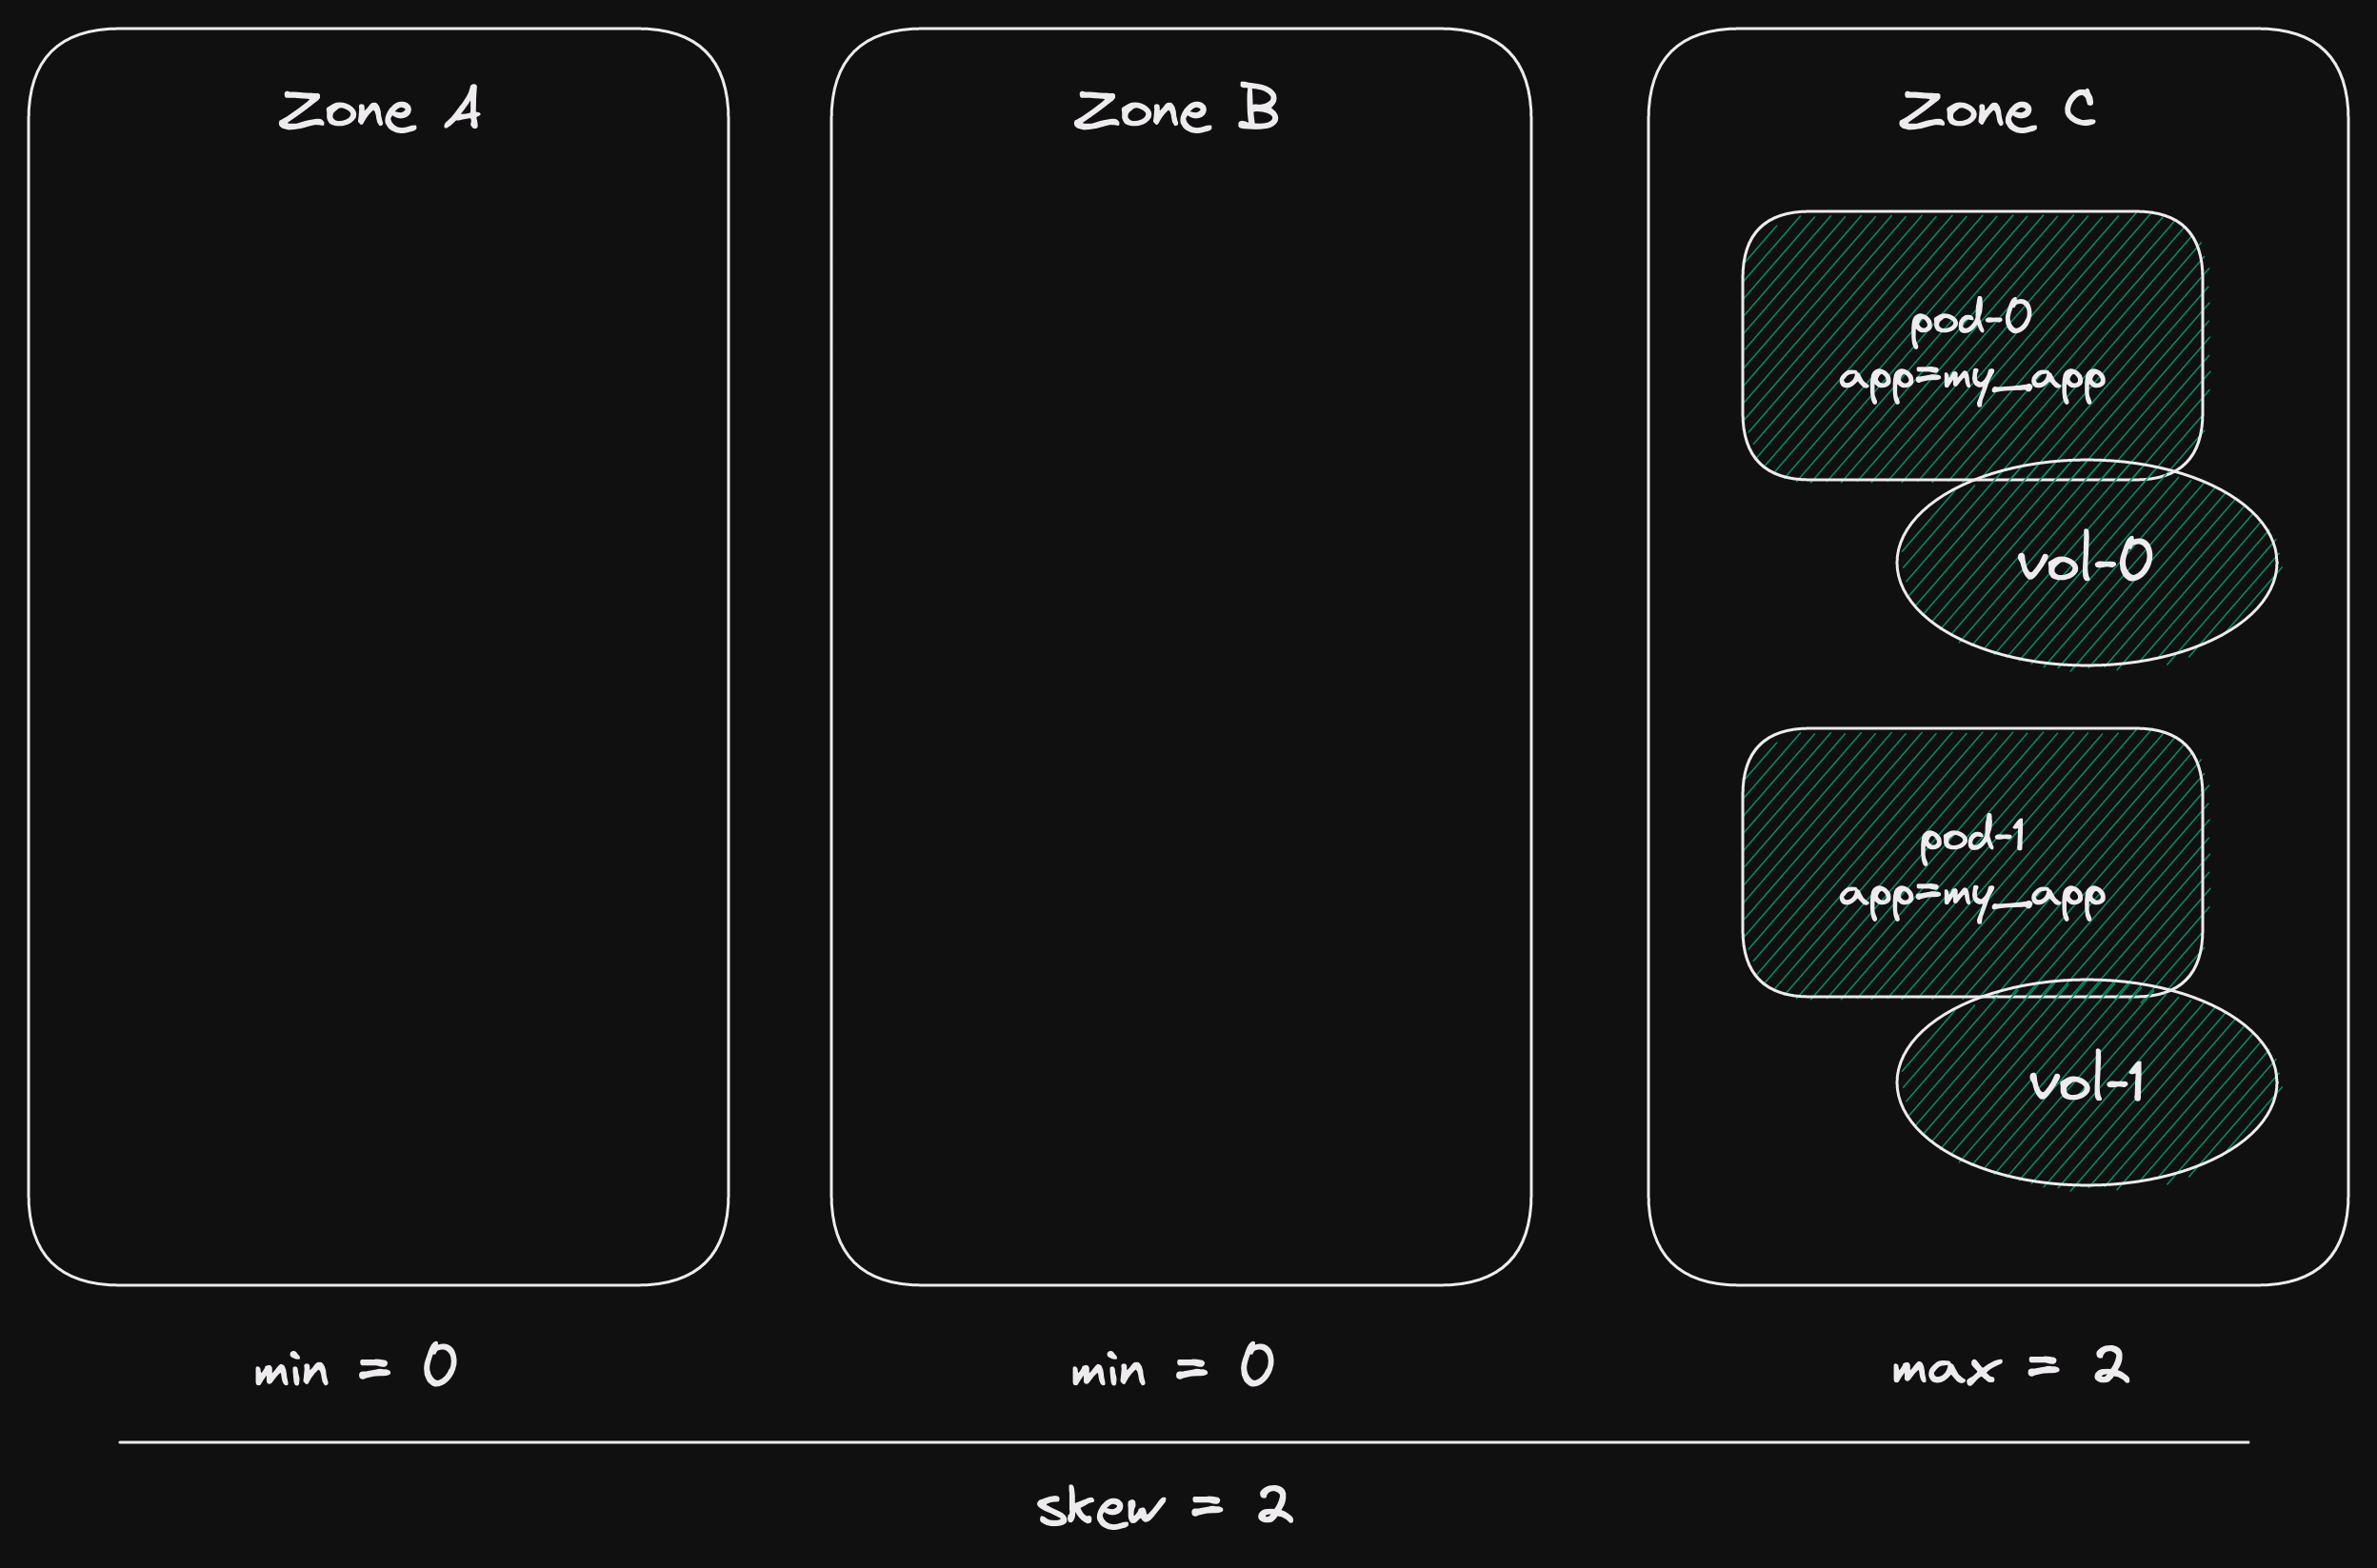 Green deployment: 2 green pods with respective persistent volumes in zone C. There is nothing in zones A and B.